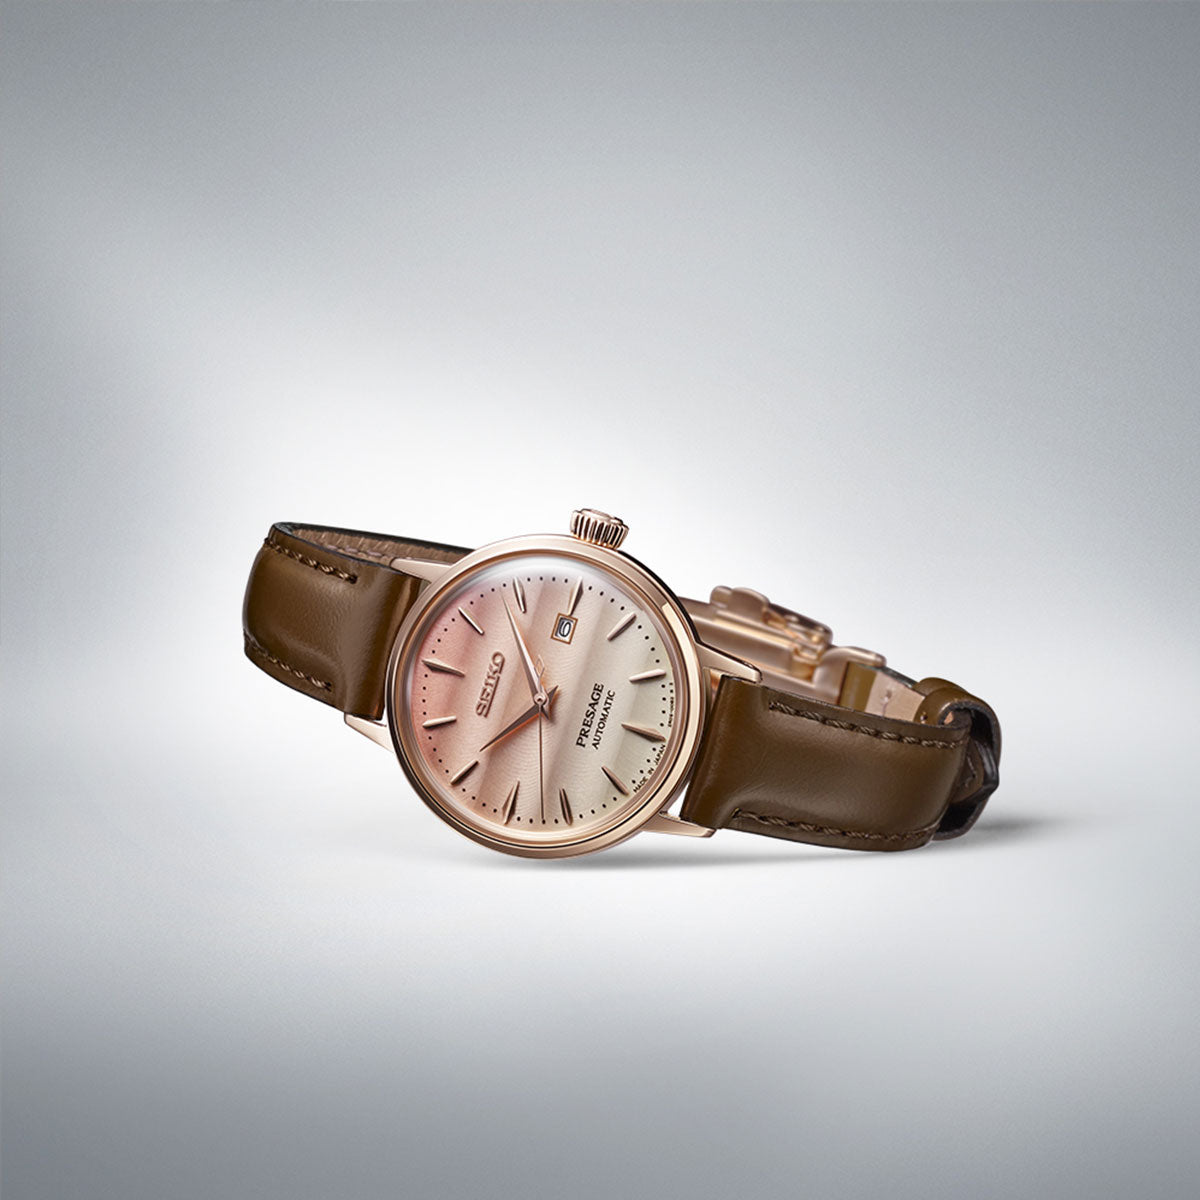 Seiko Presage Cocktail Time Star Bar Limited Edition Pinky Twilight Watch $900